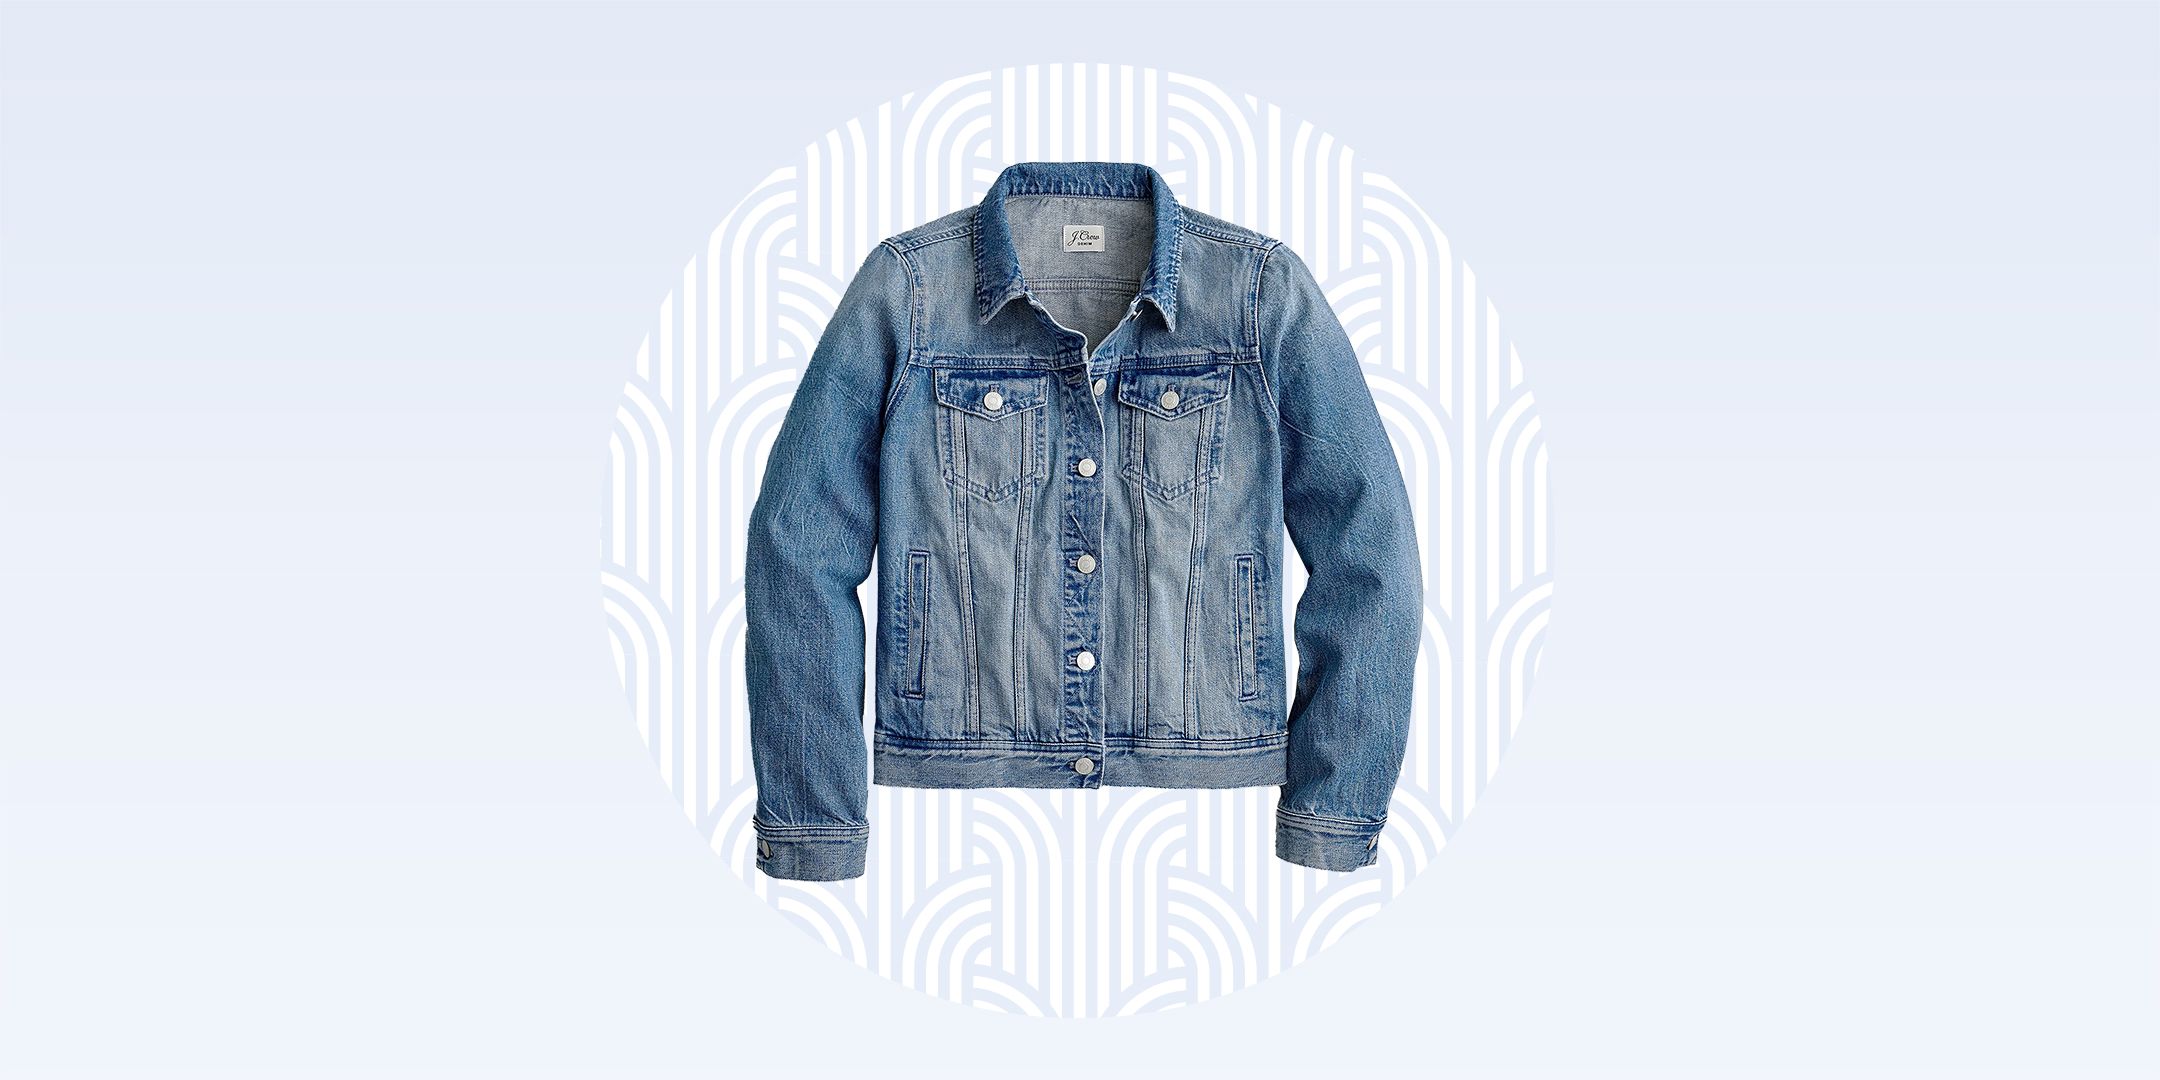 easy to be hurt Associate hobby J.Crew Classic Denim Jacket Review: Why We Love It